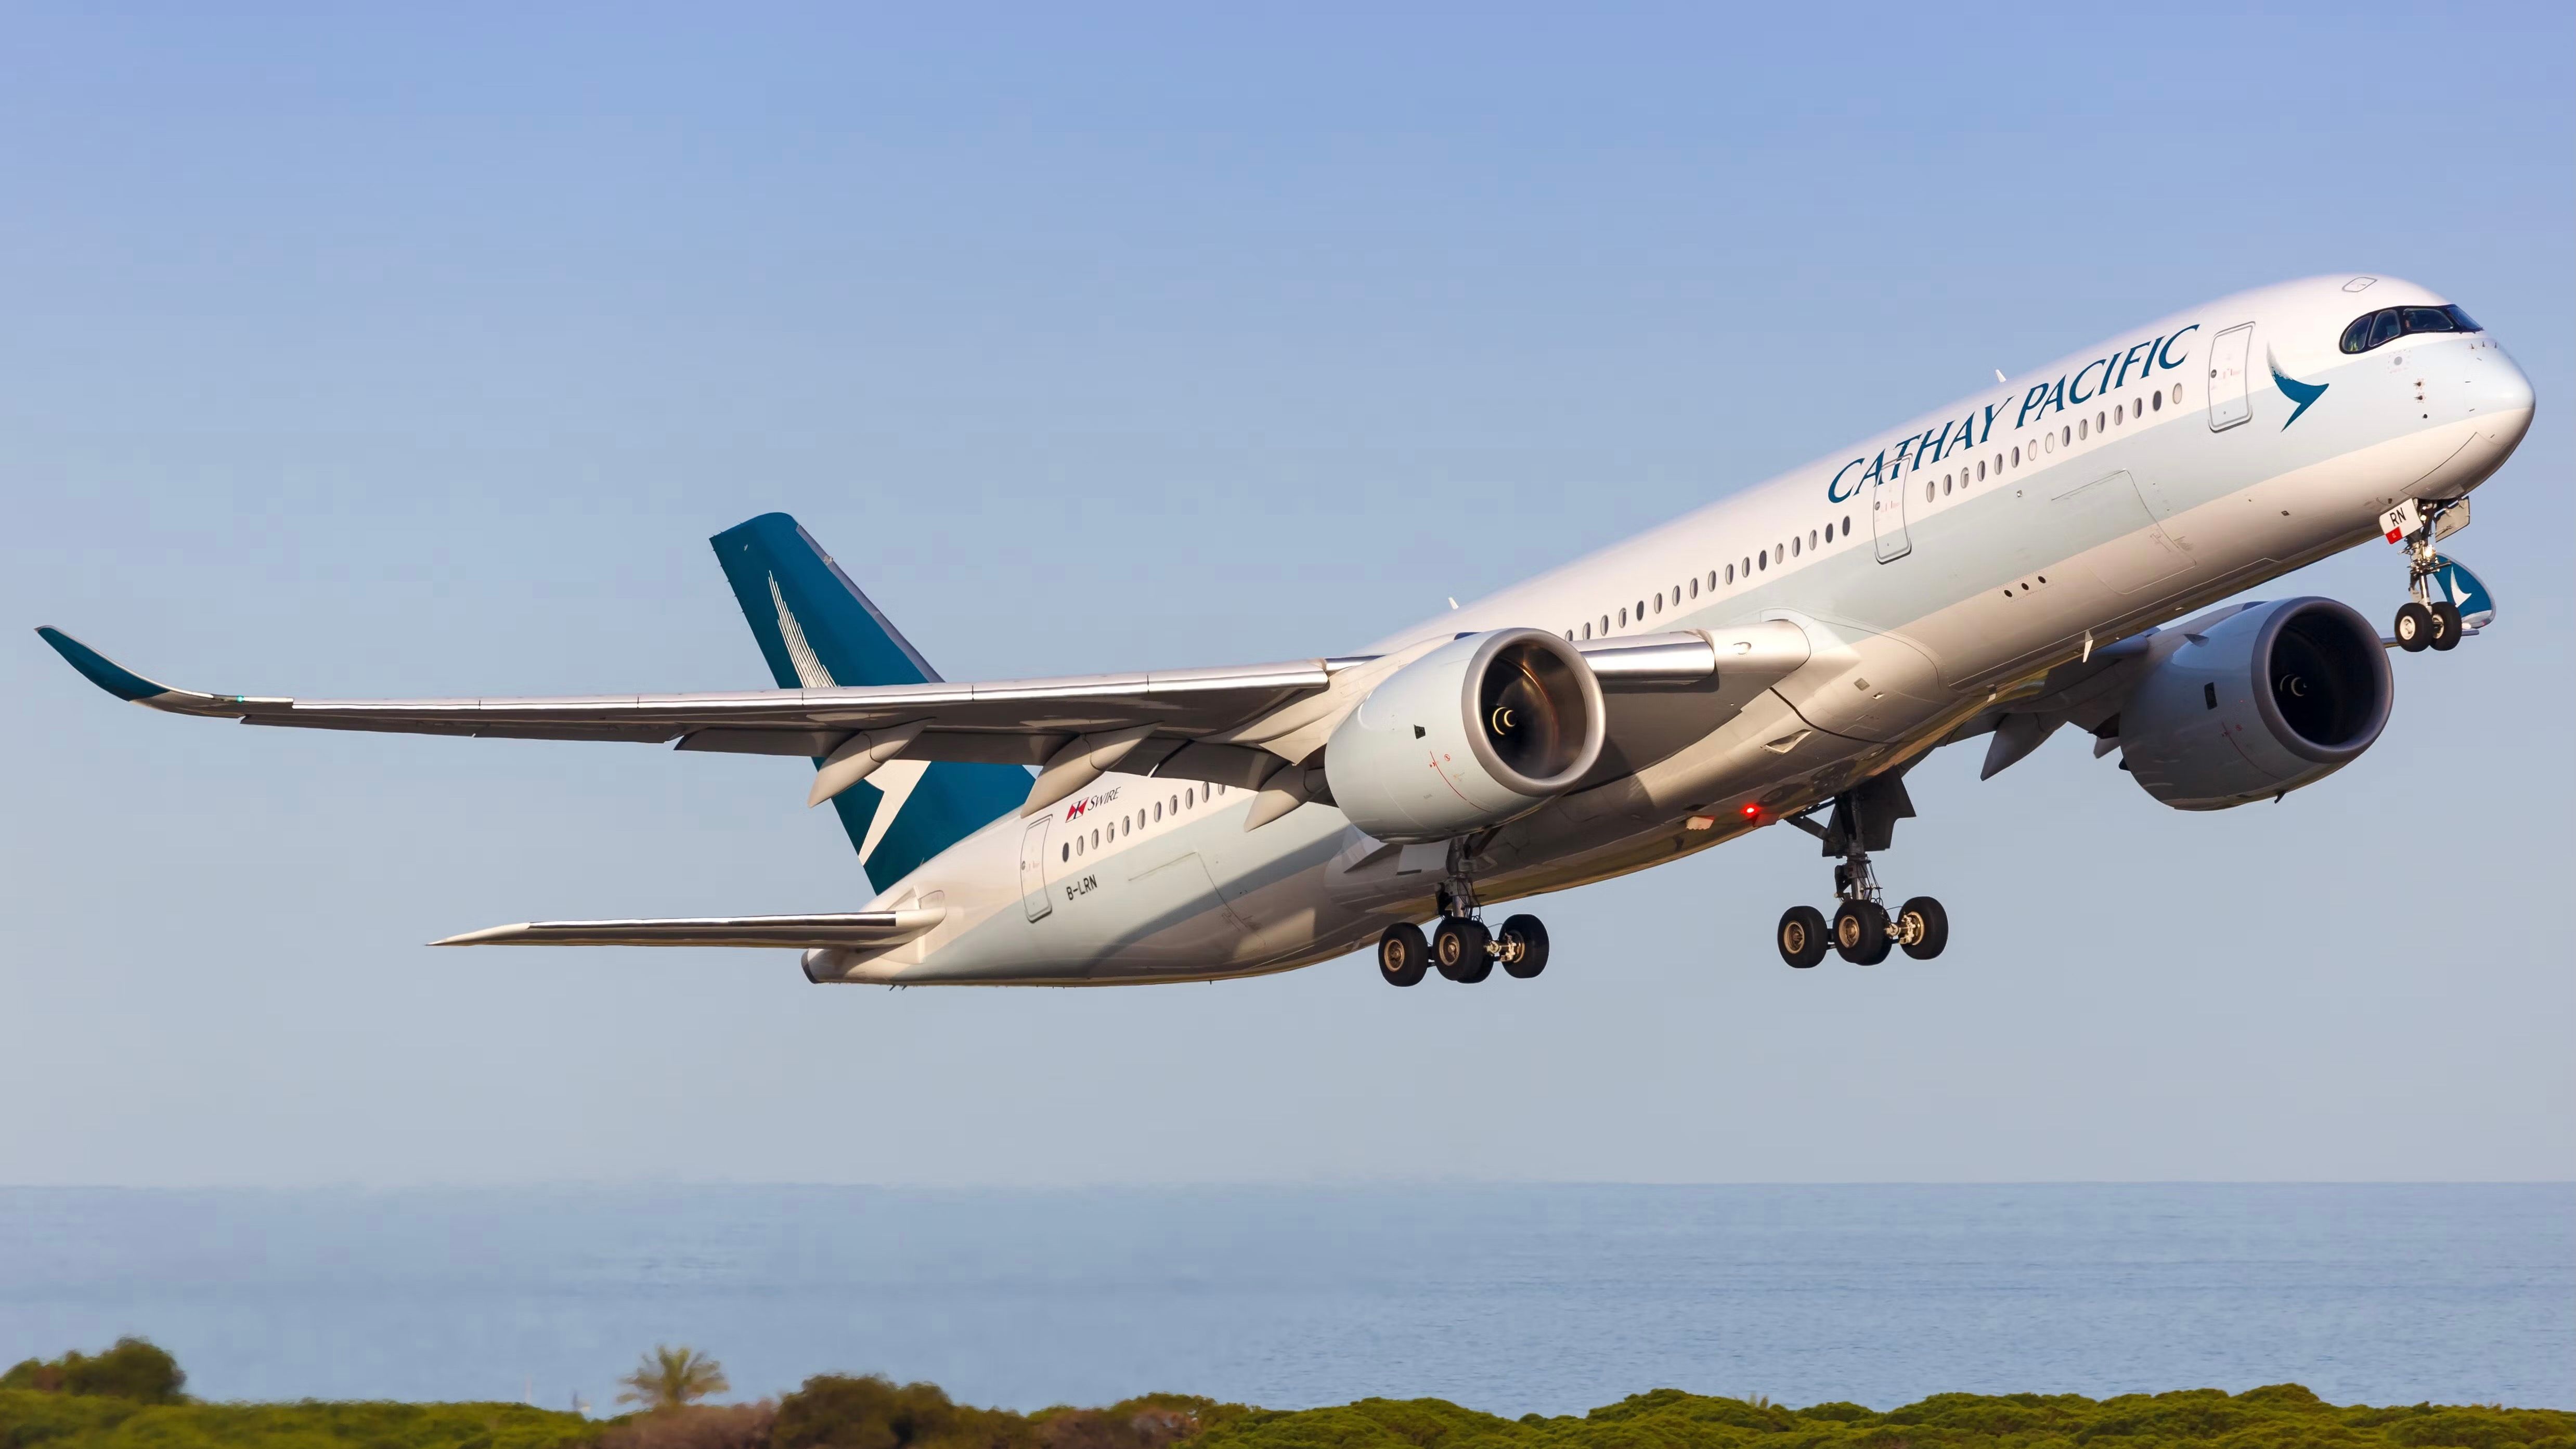 A Cathay Pacific Airbus A350 taking off.